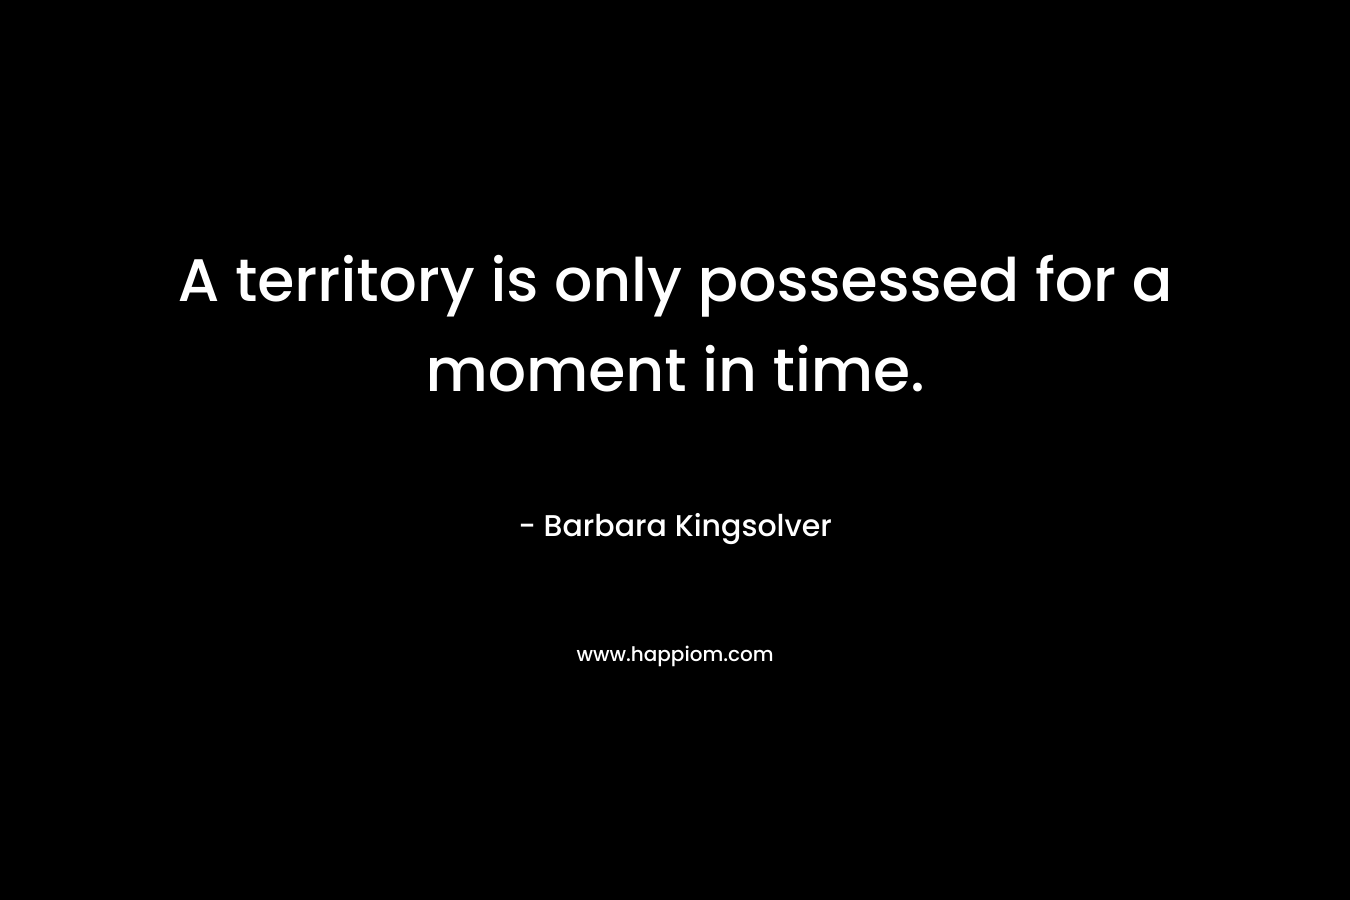 A territory is only possessed for a moment in time.